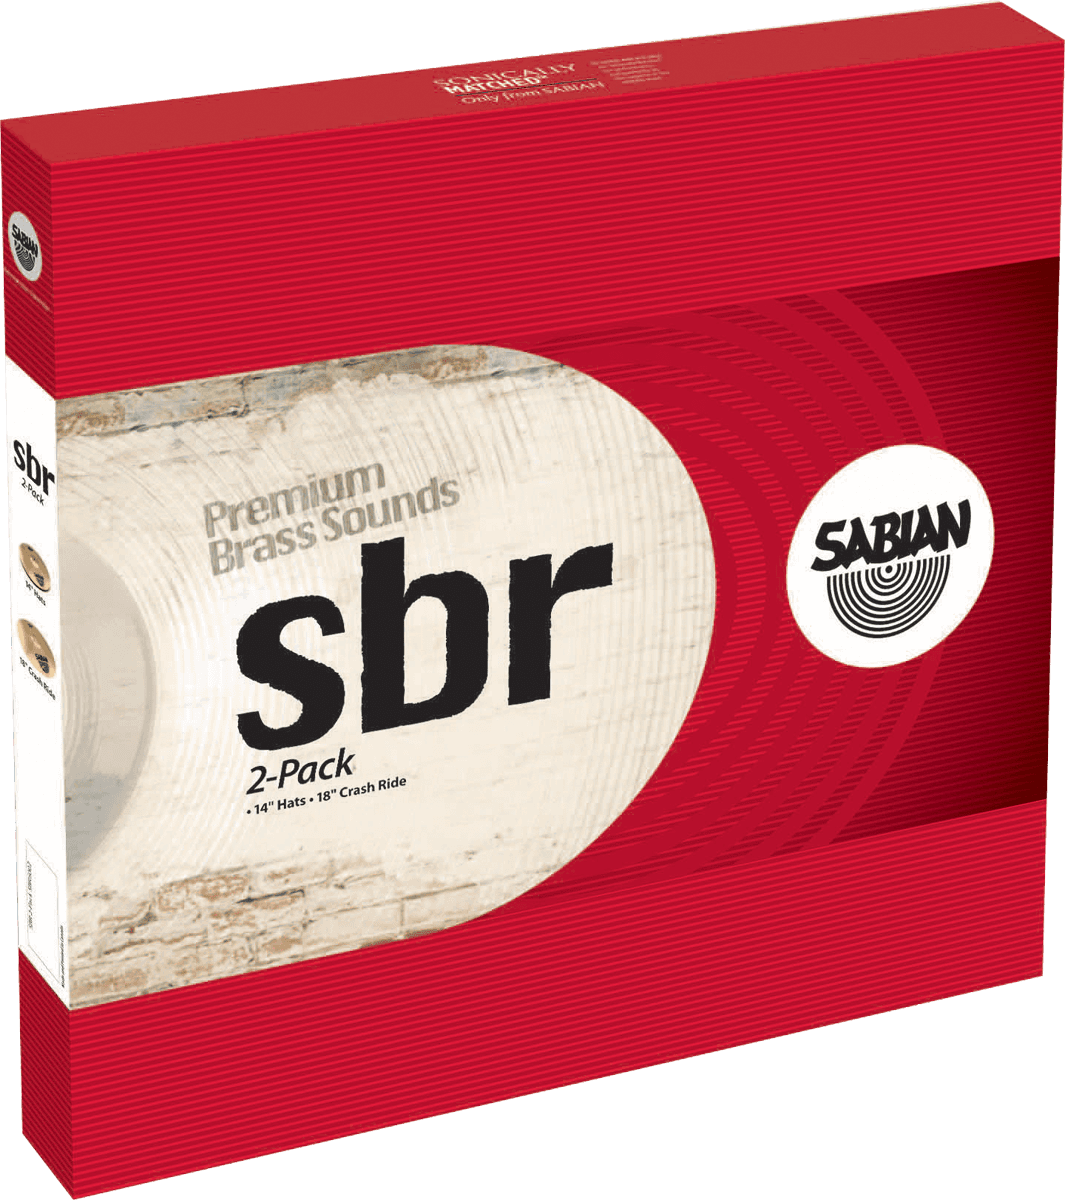 Sabian Sbr 2 Pack - Cymbals set - Main picture